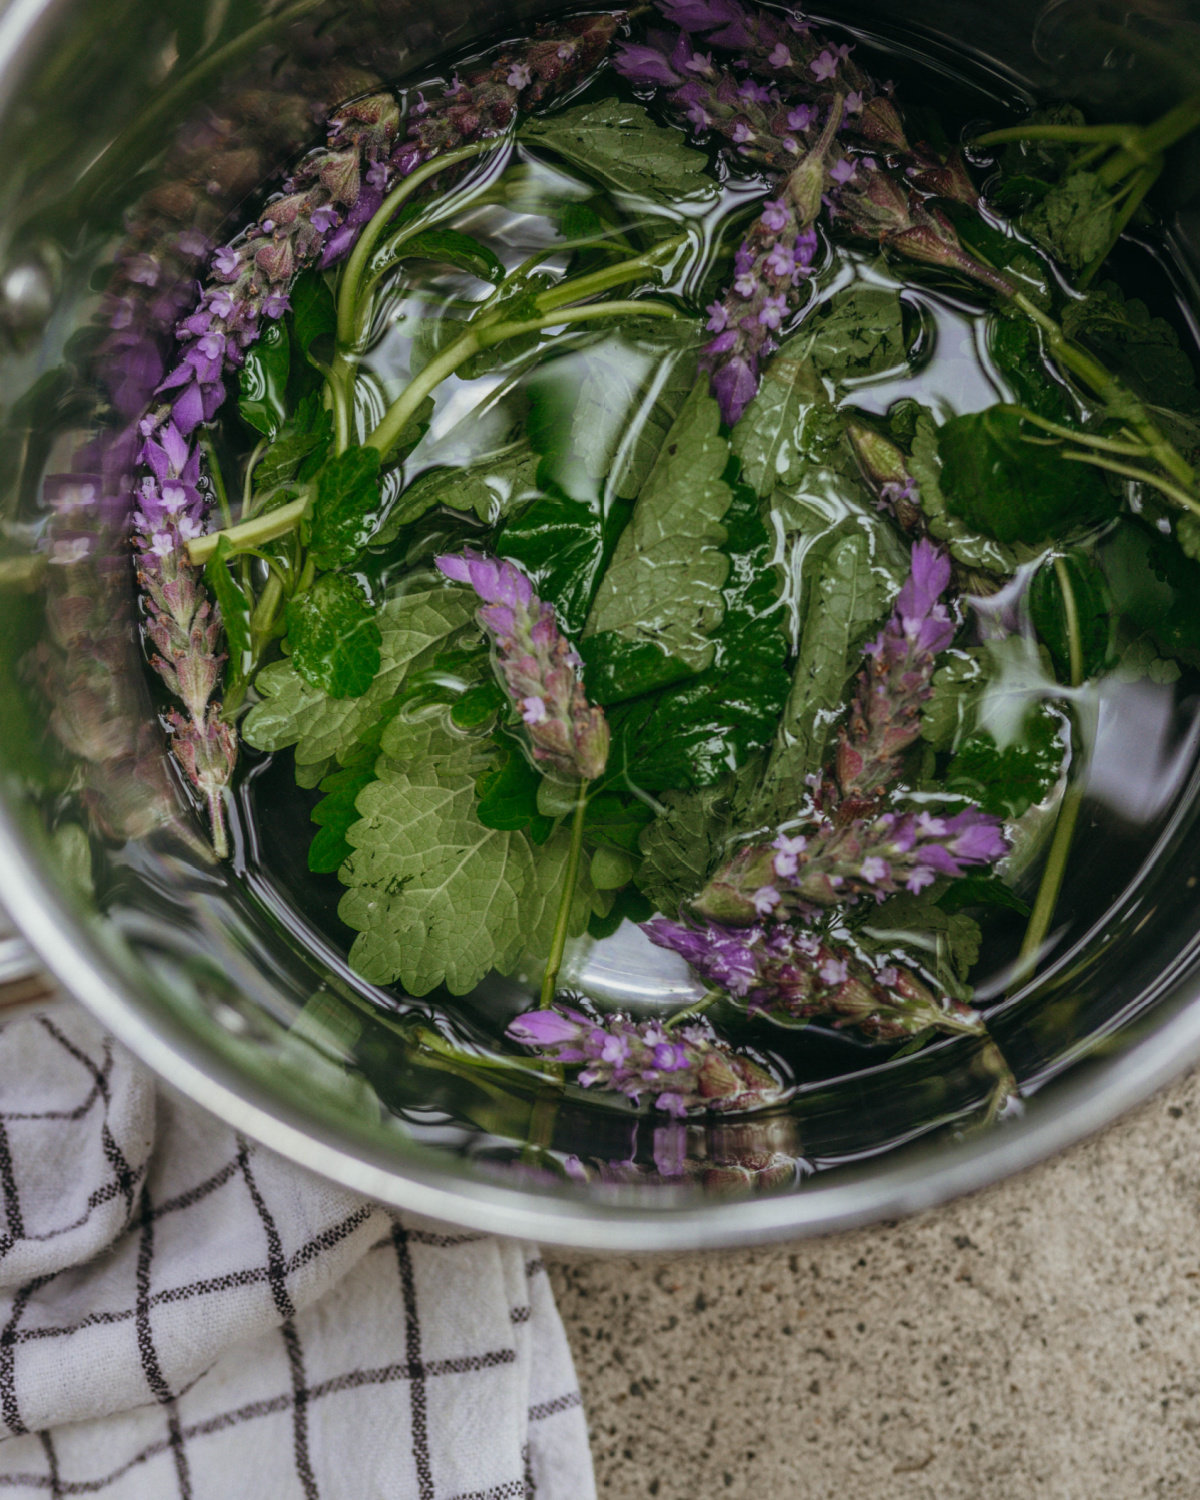 lavender and lemon balm infusing in water